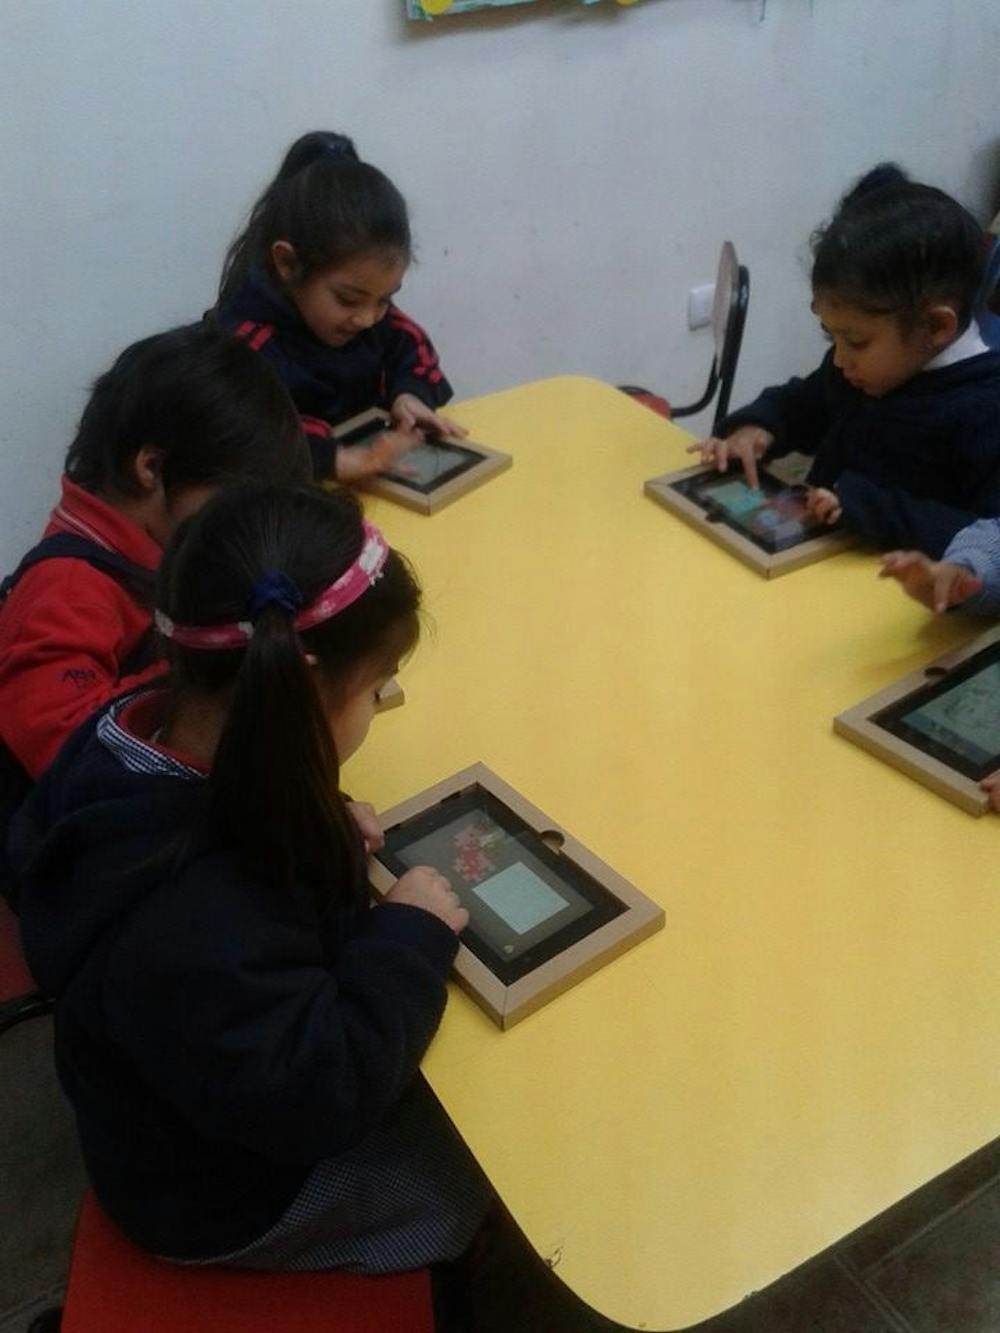 Do Mobile Devices In The Classroom Really Improve Learning Outcomes - 